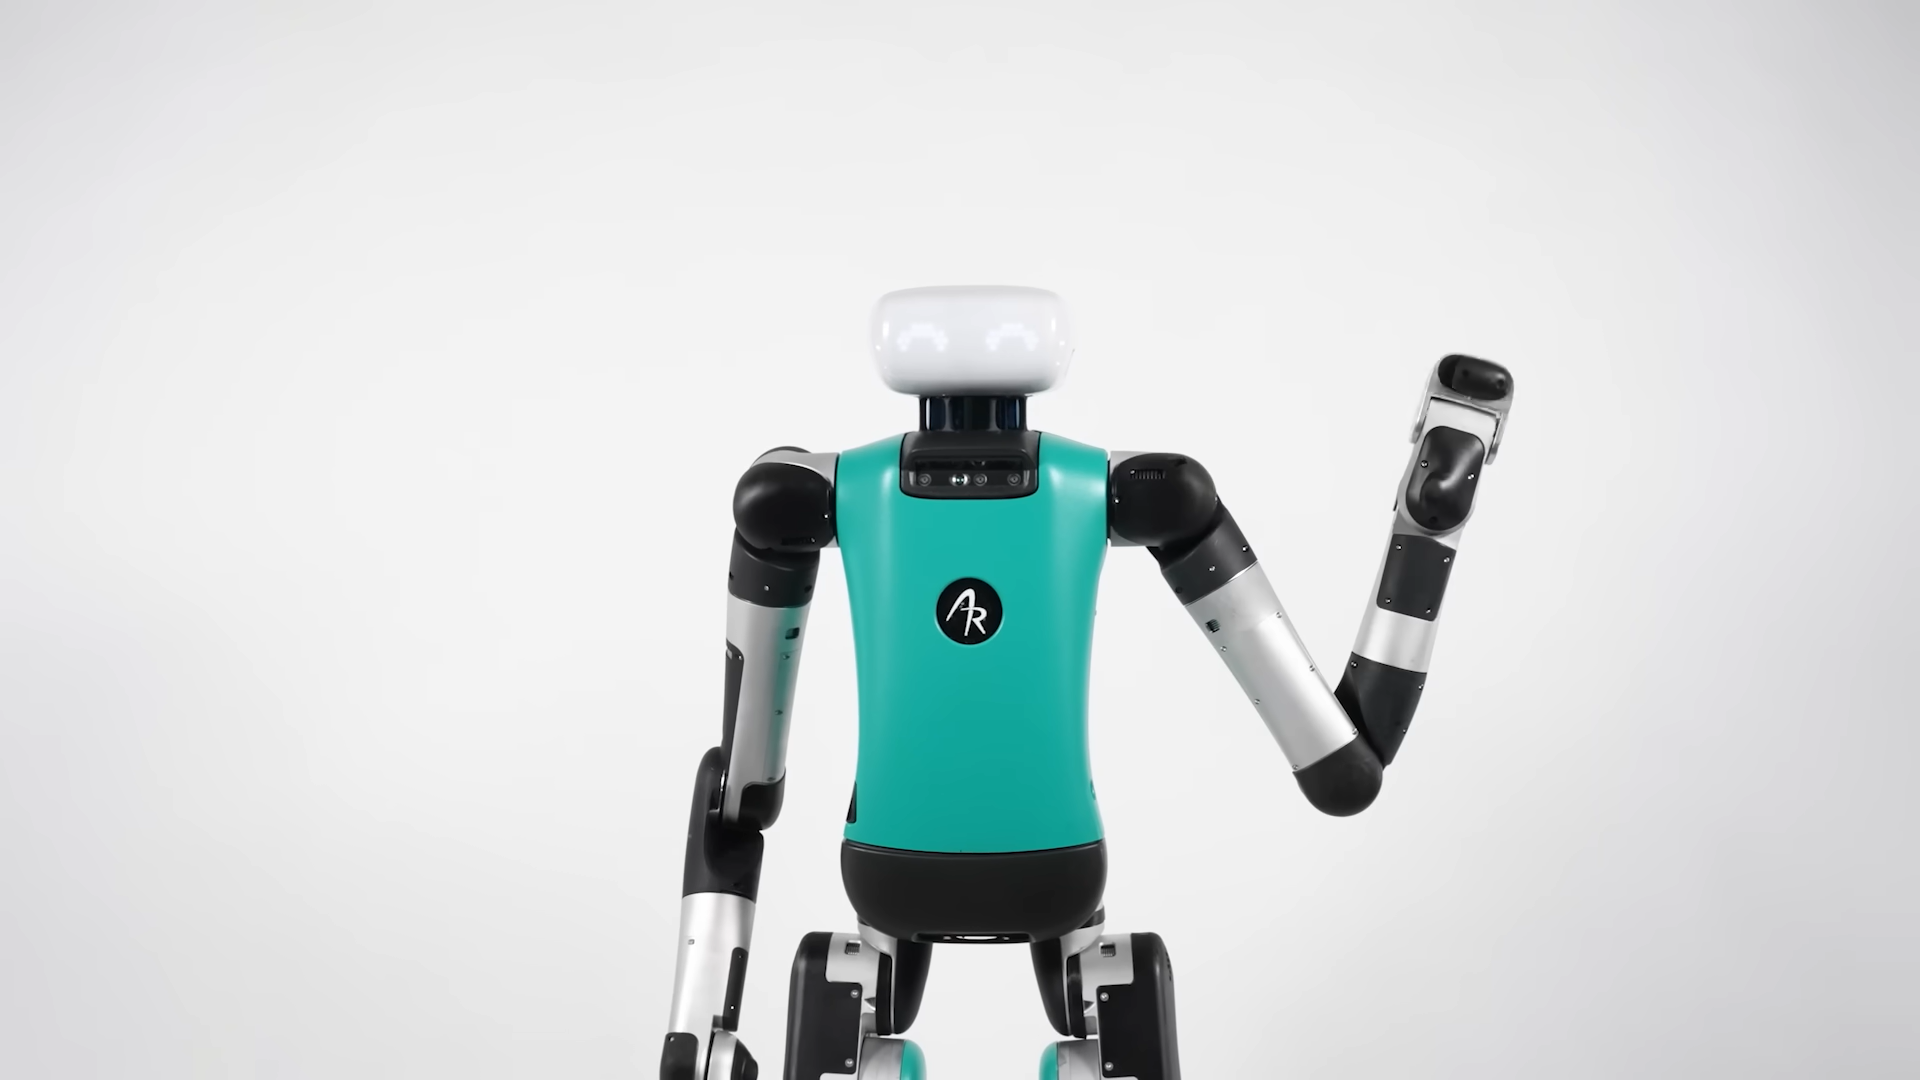 Why is Toyota Developing Humanoid Robots?, Corporate